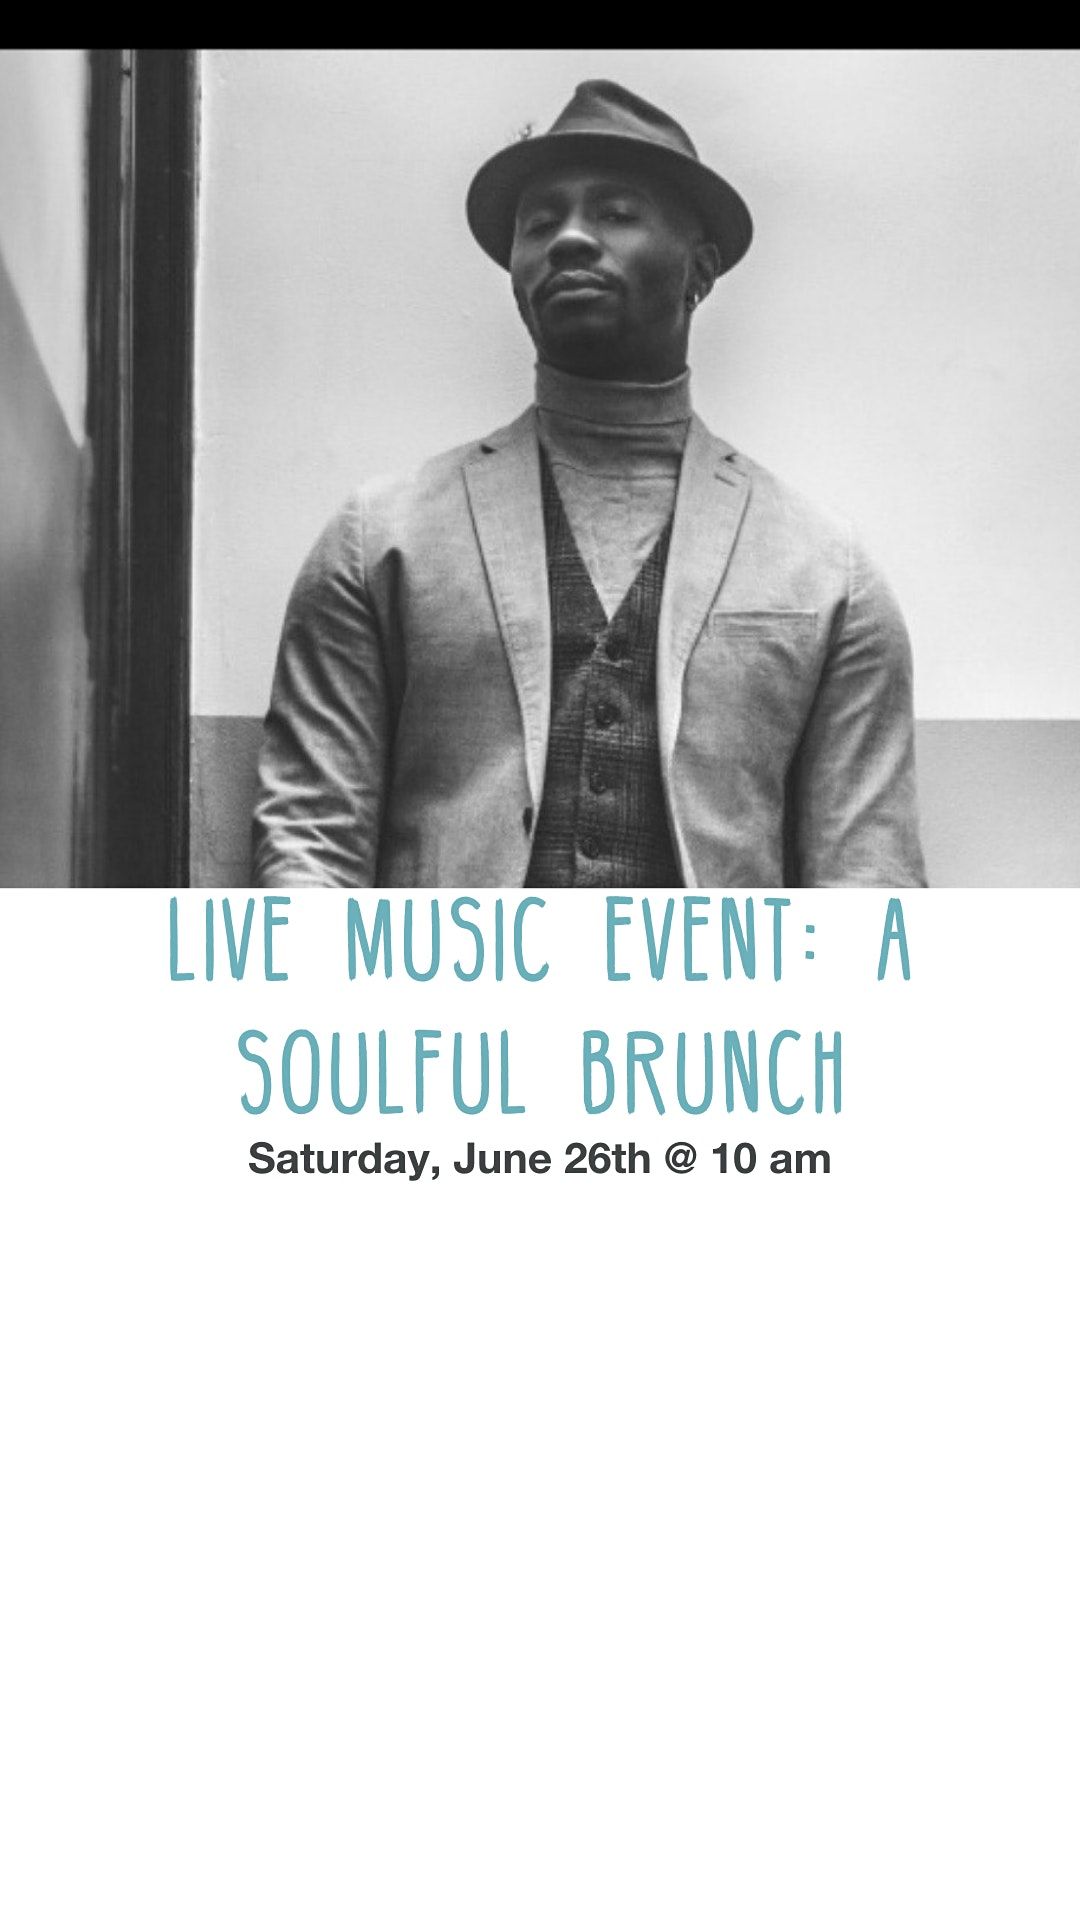 Live Music with Isaac Sinclair Teel: A Soulful Brunch